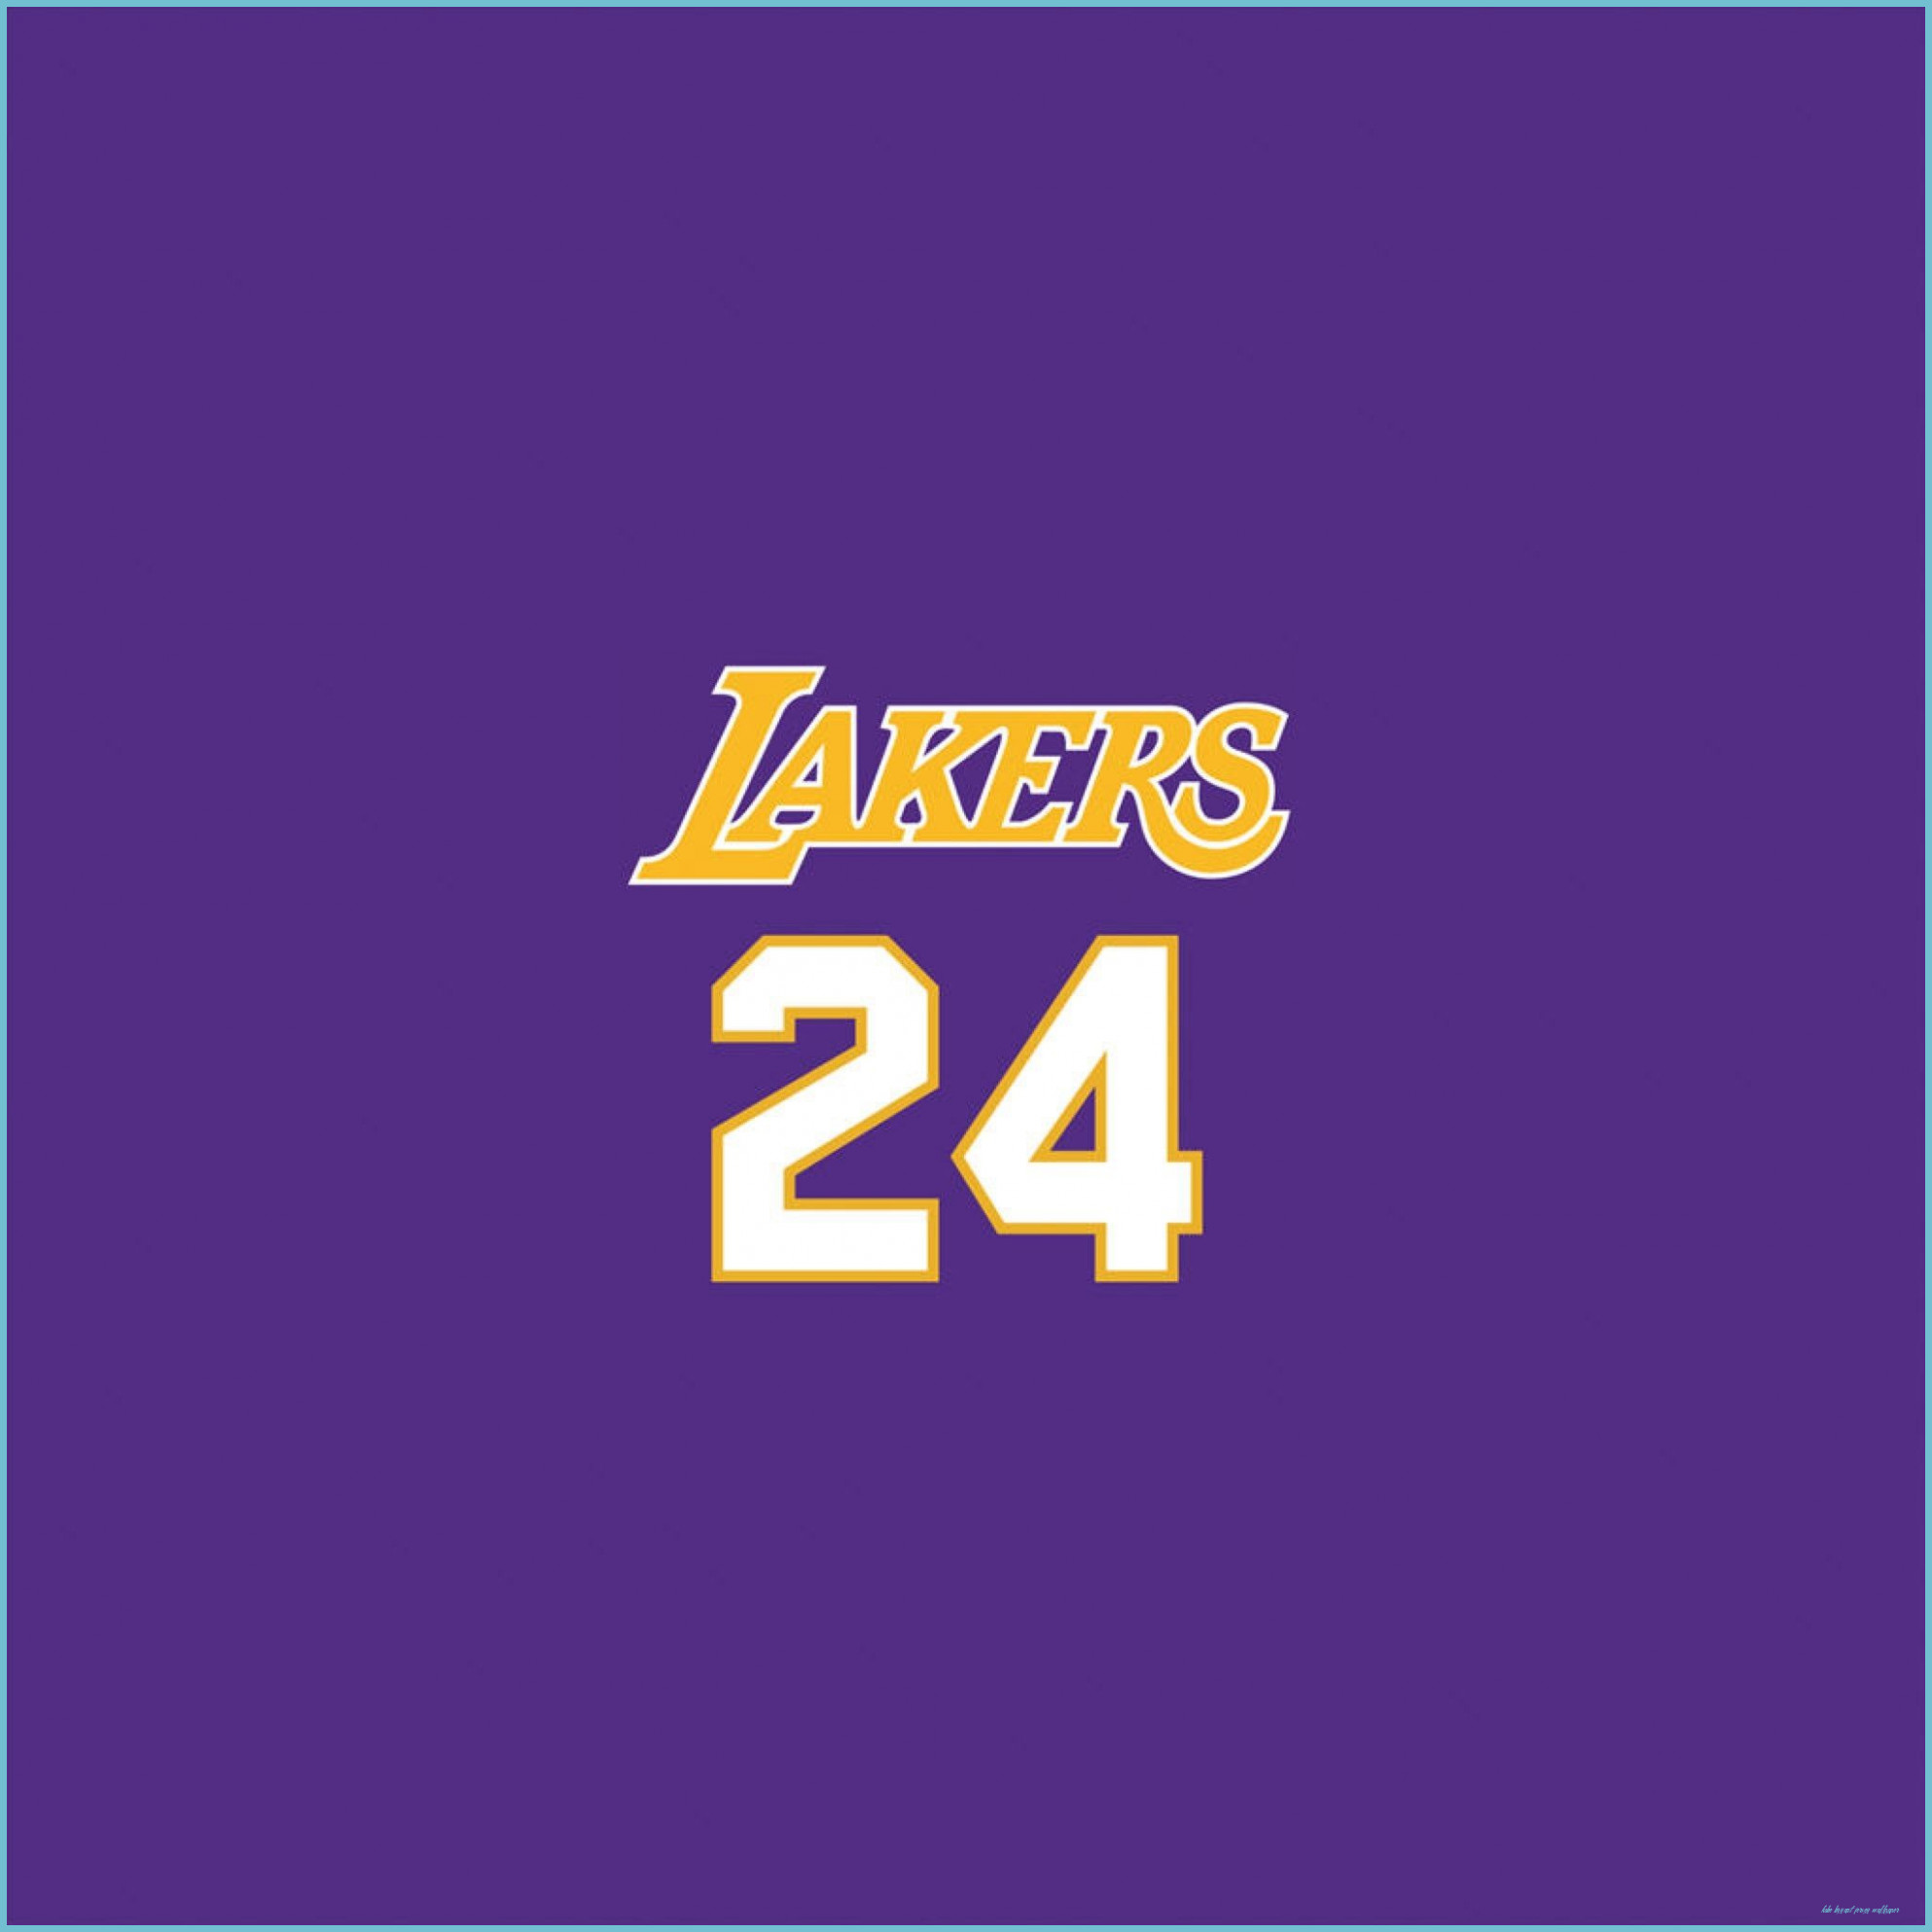 Lakers 8 Wallpaper Free Lakers 8 Background Bryant Jersey Wallpaper